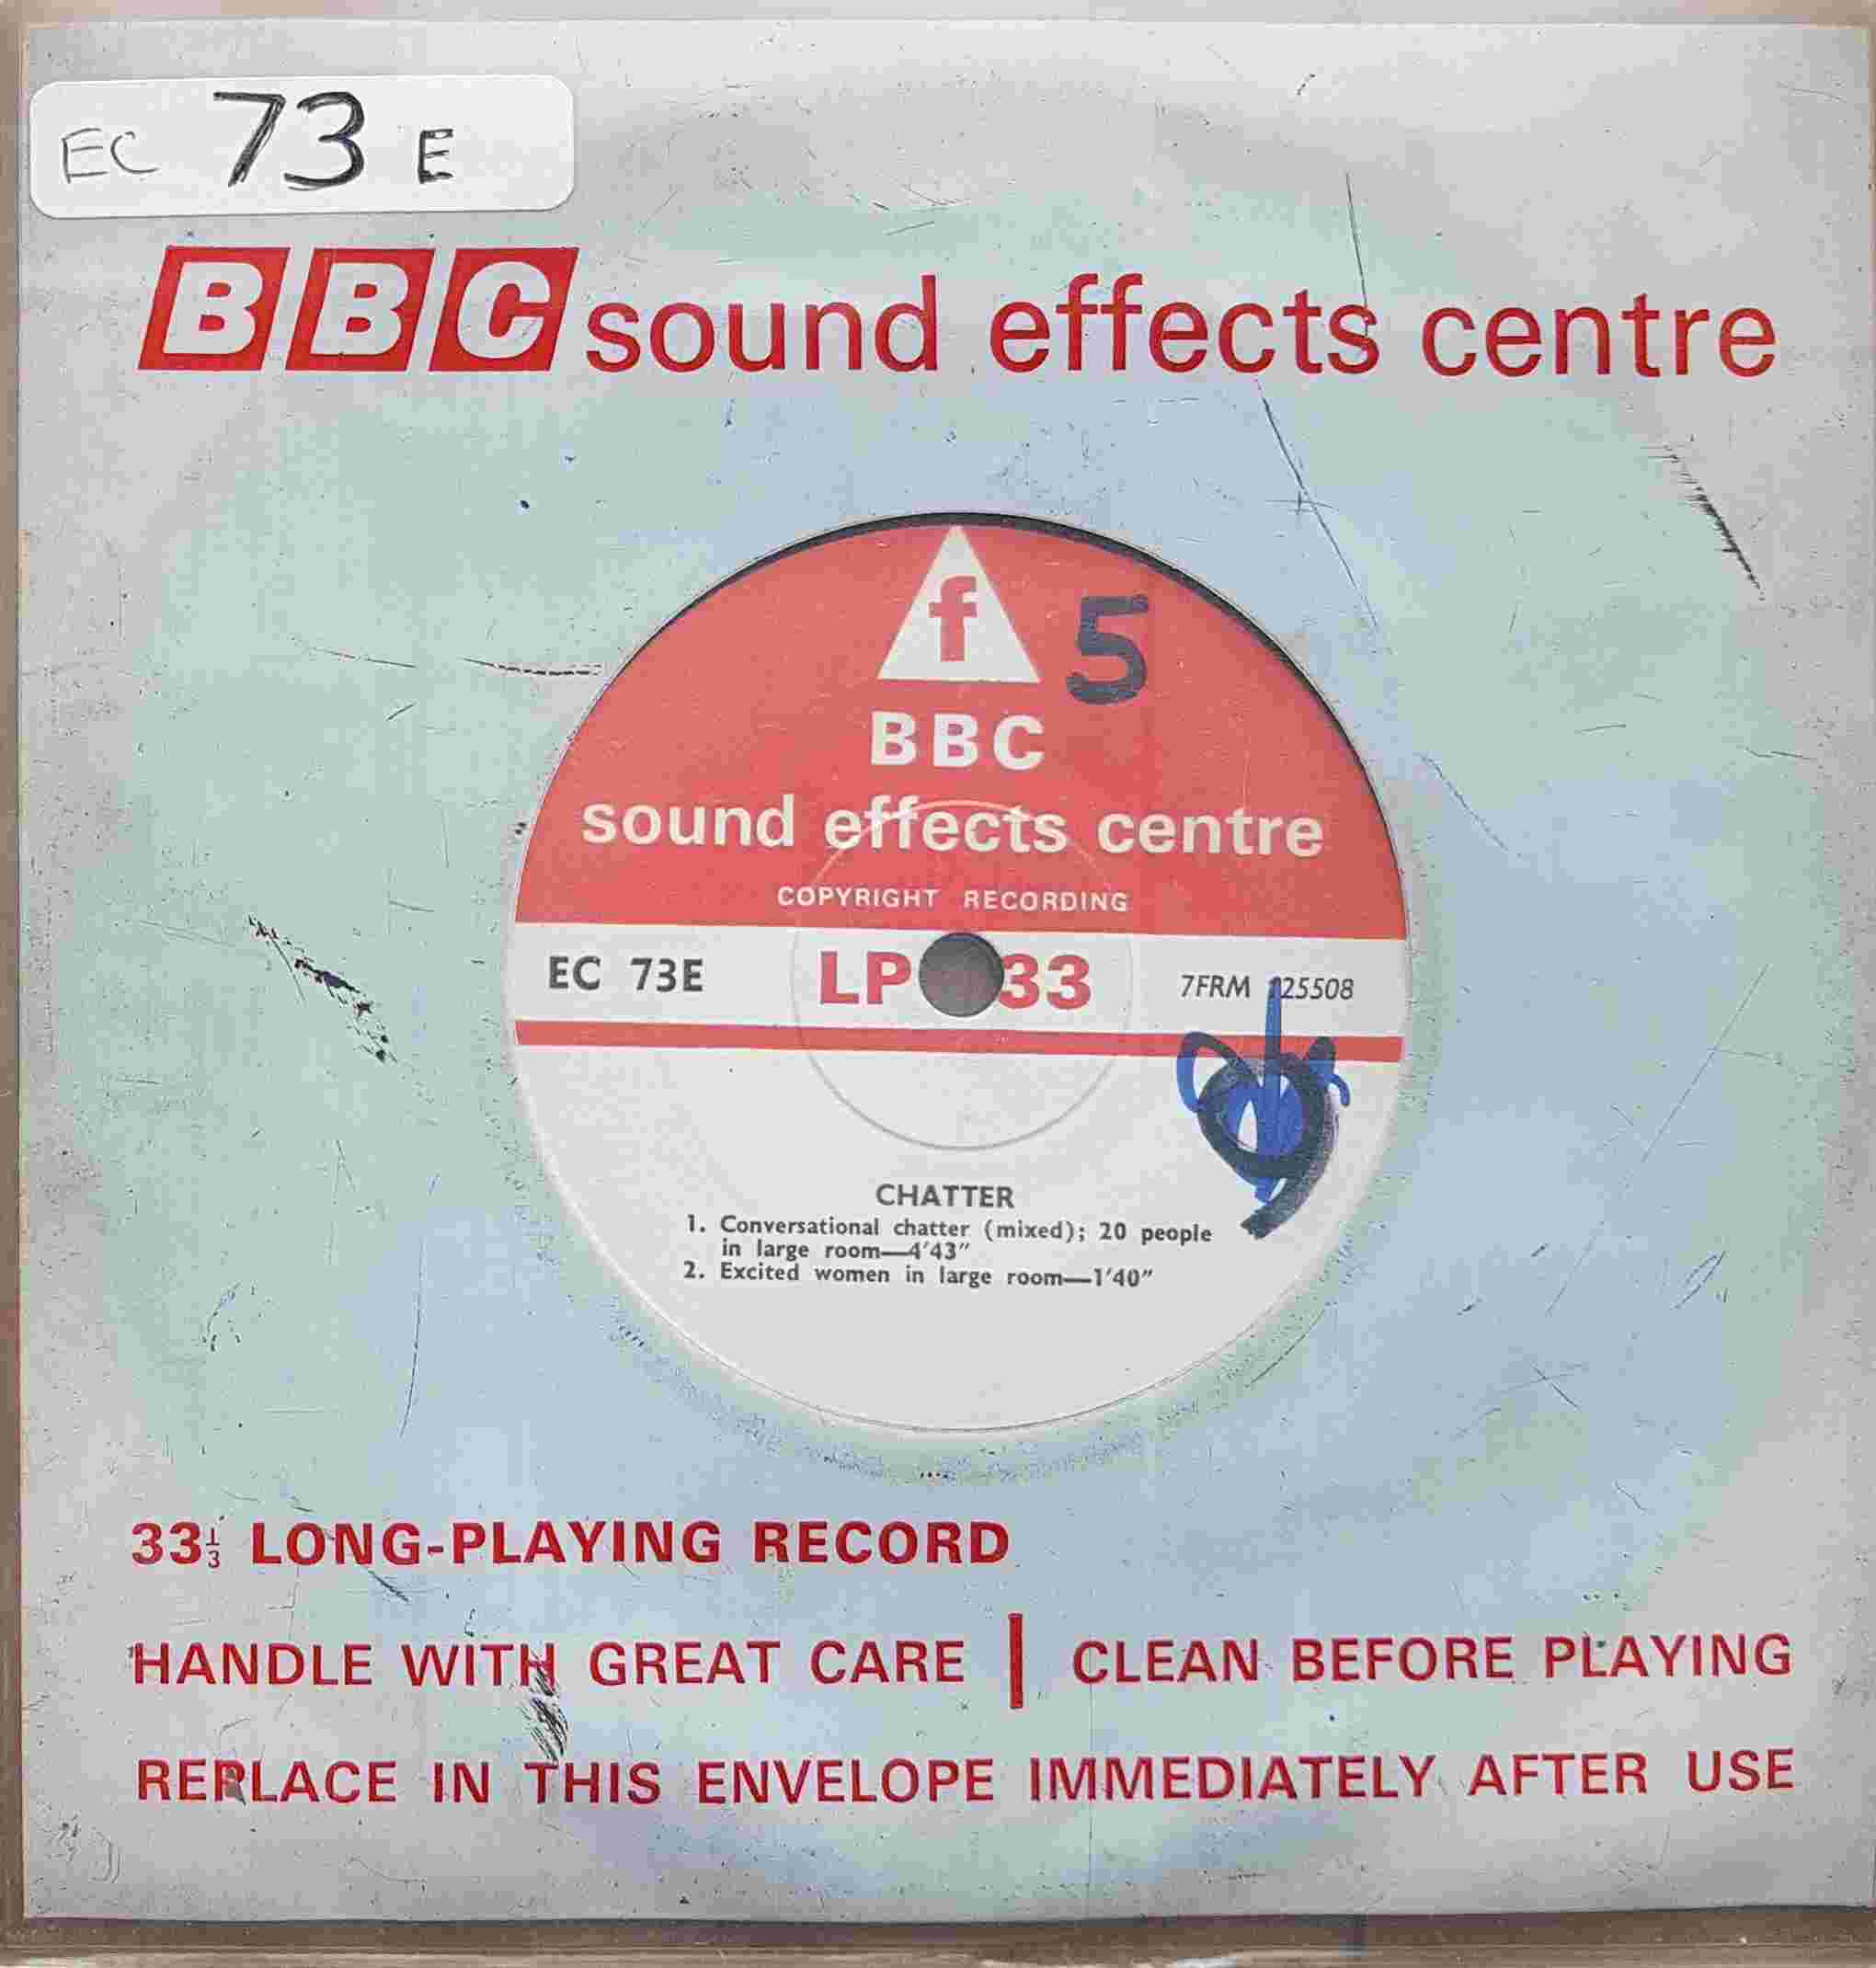 Picture of EC 73E Chatter by artist Not registered from the BBC records and Tapes library